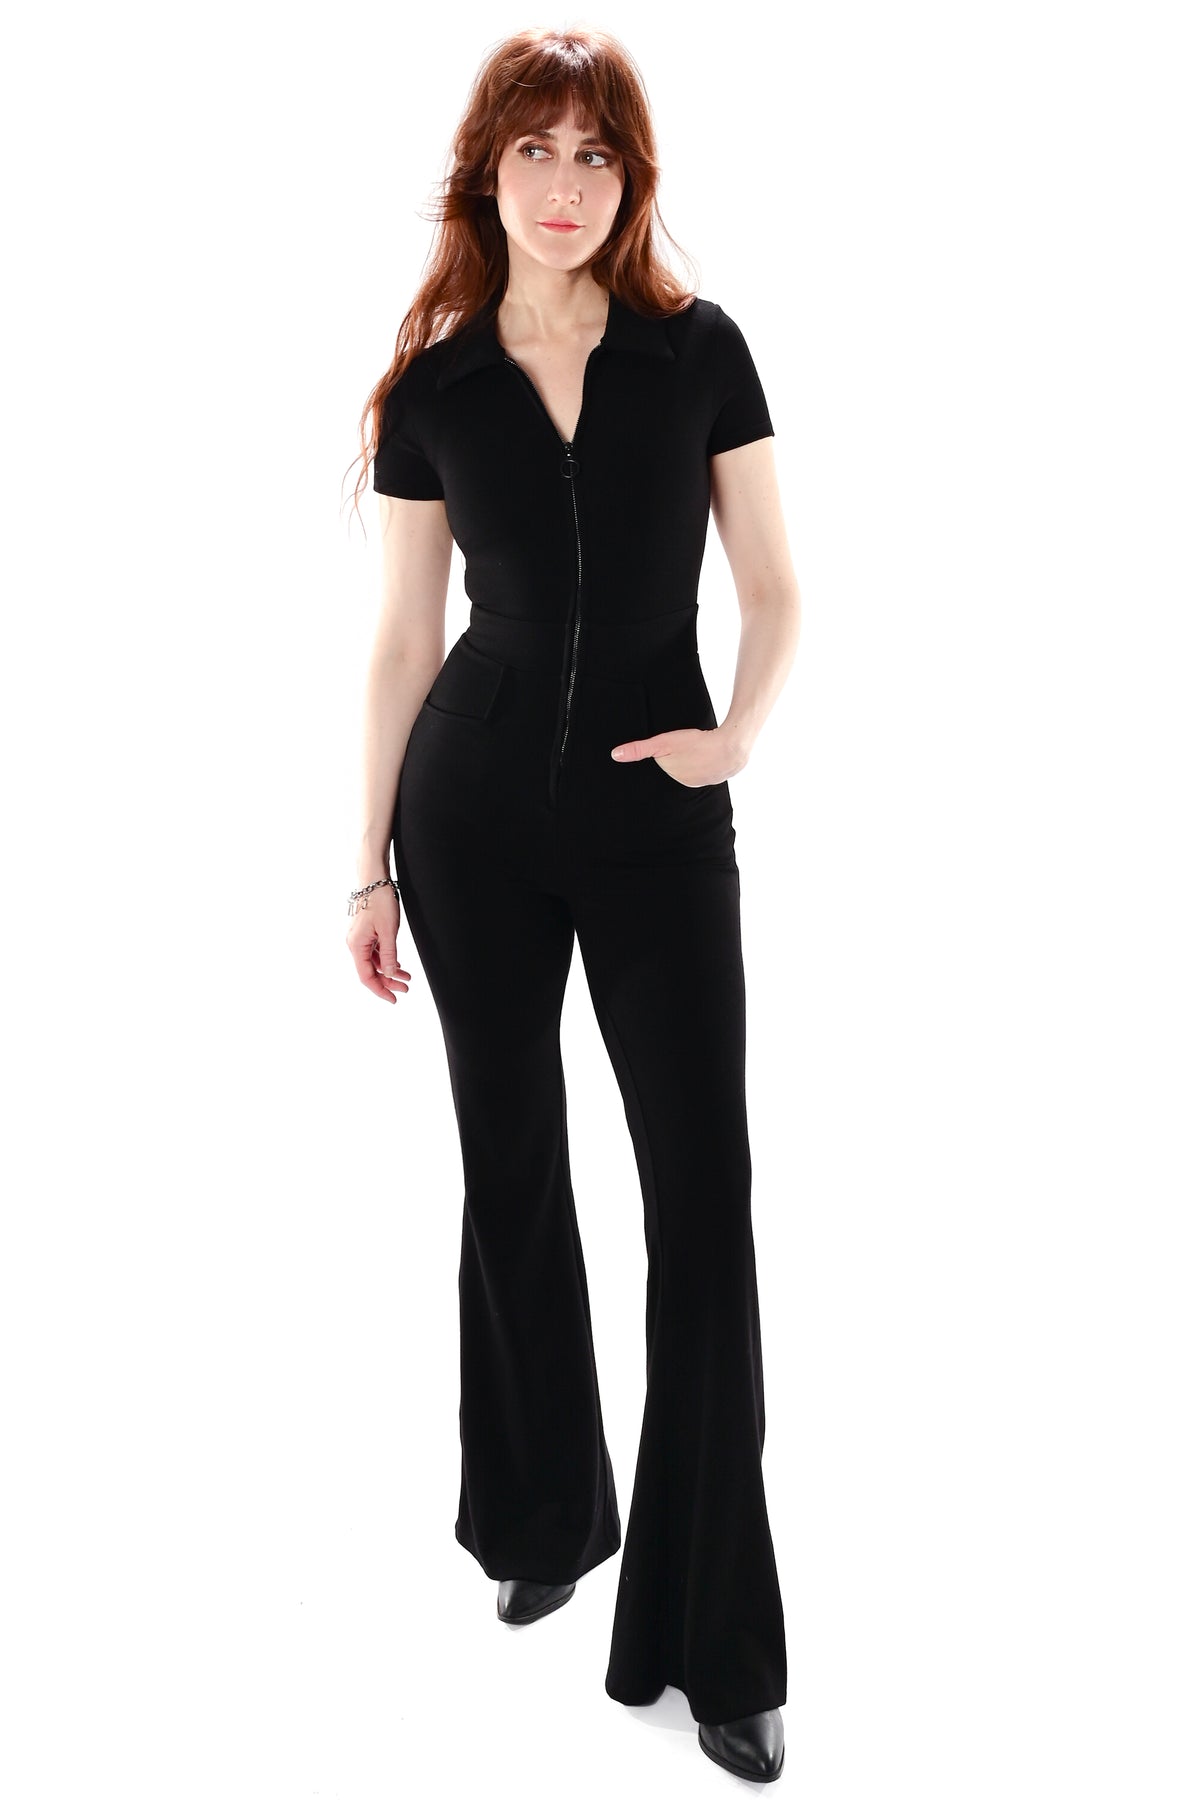 black zip up jumpsuit with collar and flared bottoms